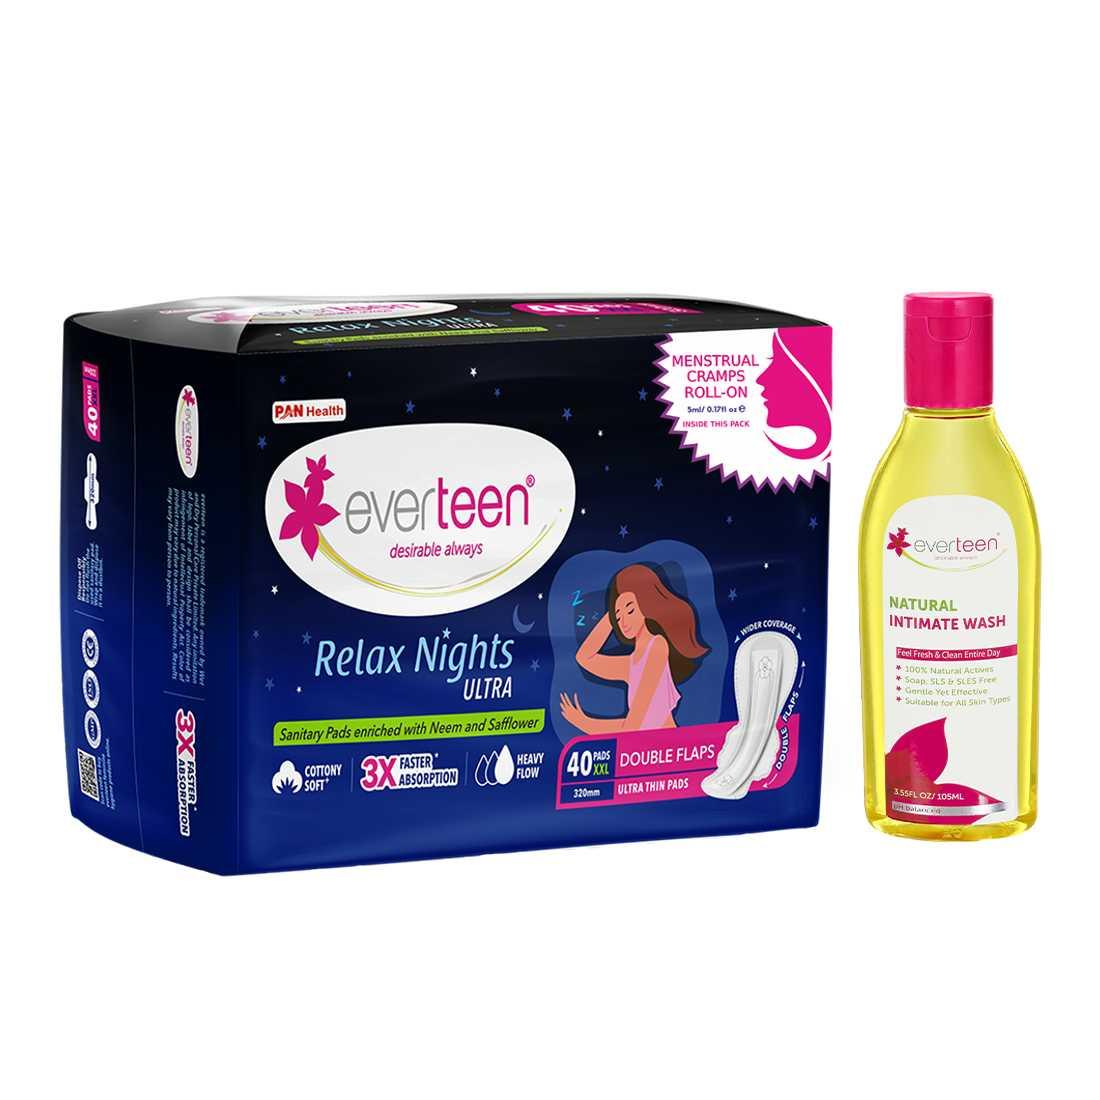 everteen Relax Nights Ultra 40 Pads and Natural Intimate Wash 105ml 7419870518264